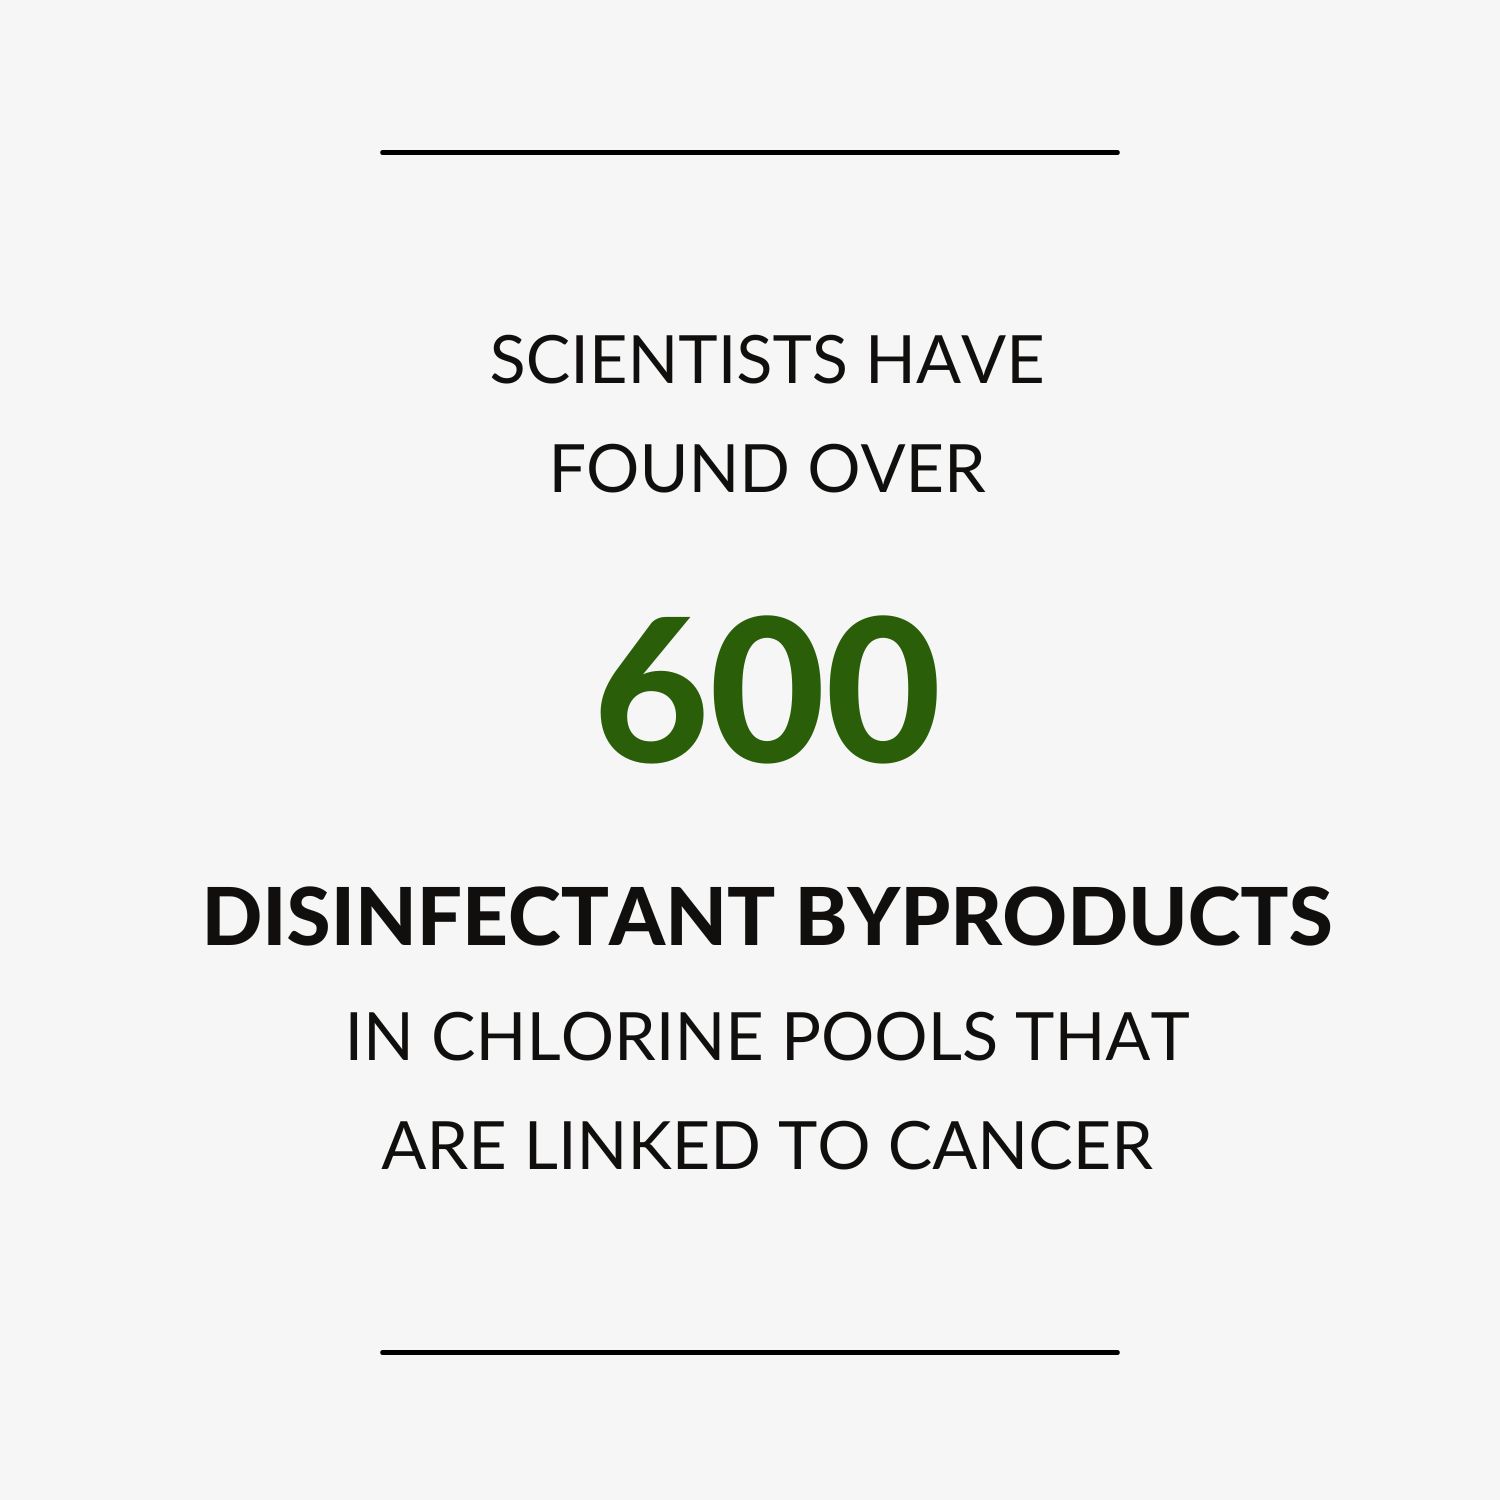 Fact - Scientists have found over 600 disinfectant byproducts in chlorine pools that are linked to cancer